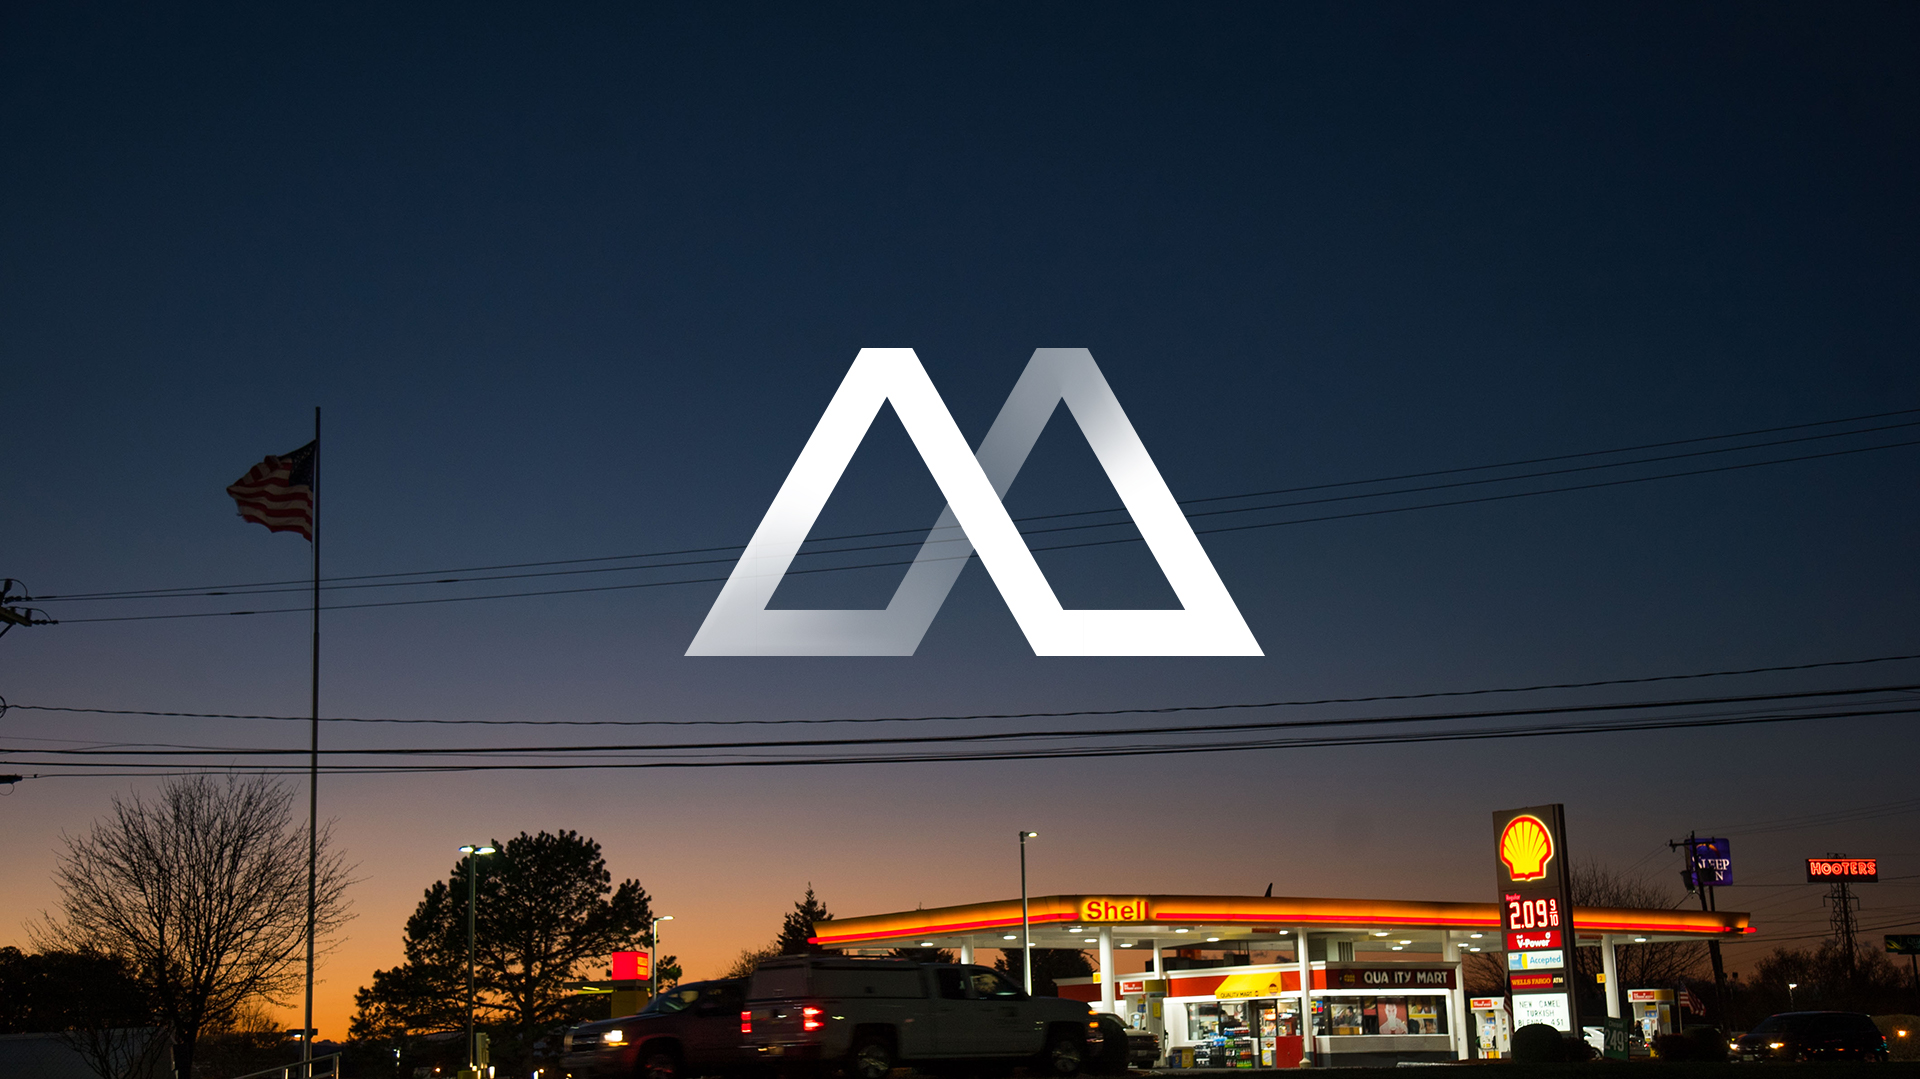 Manto films logo superimposed over an American sunset